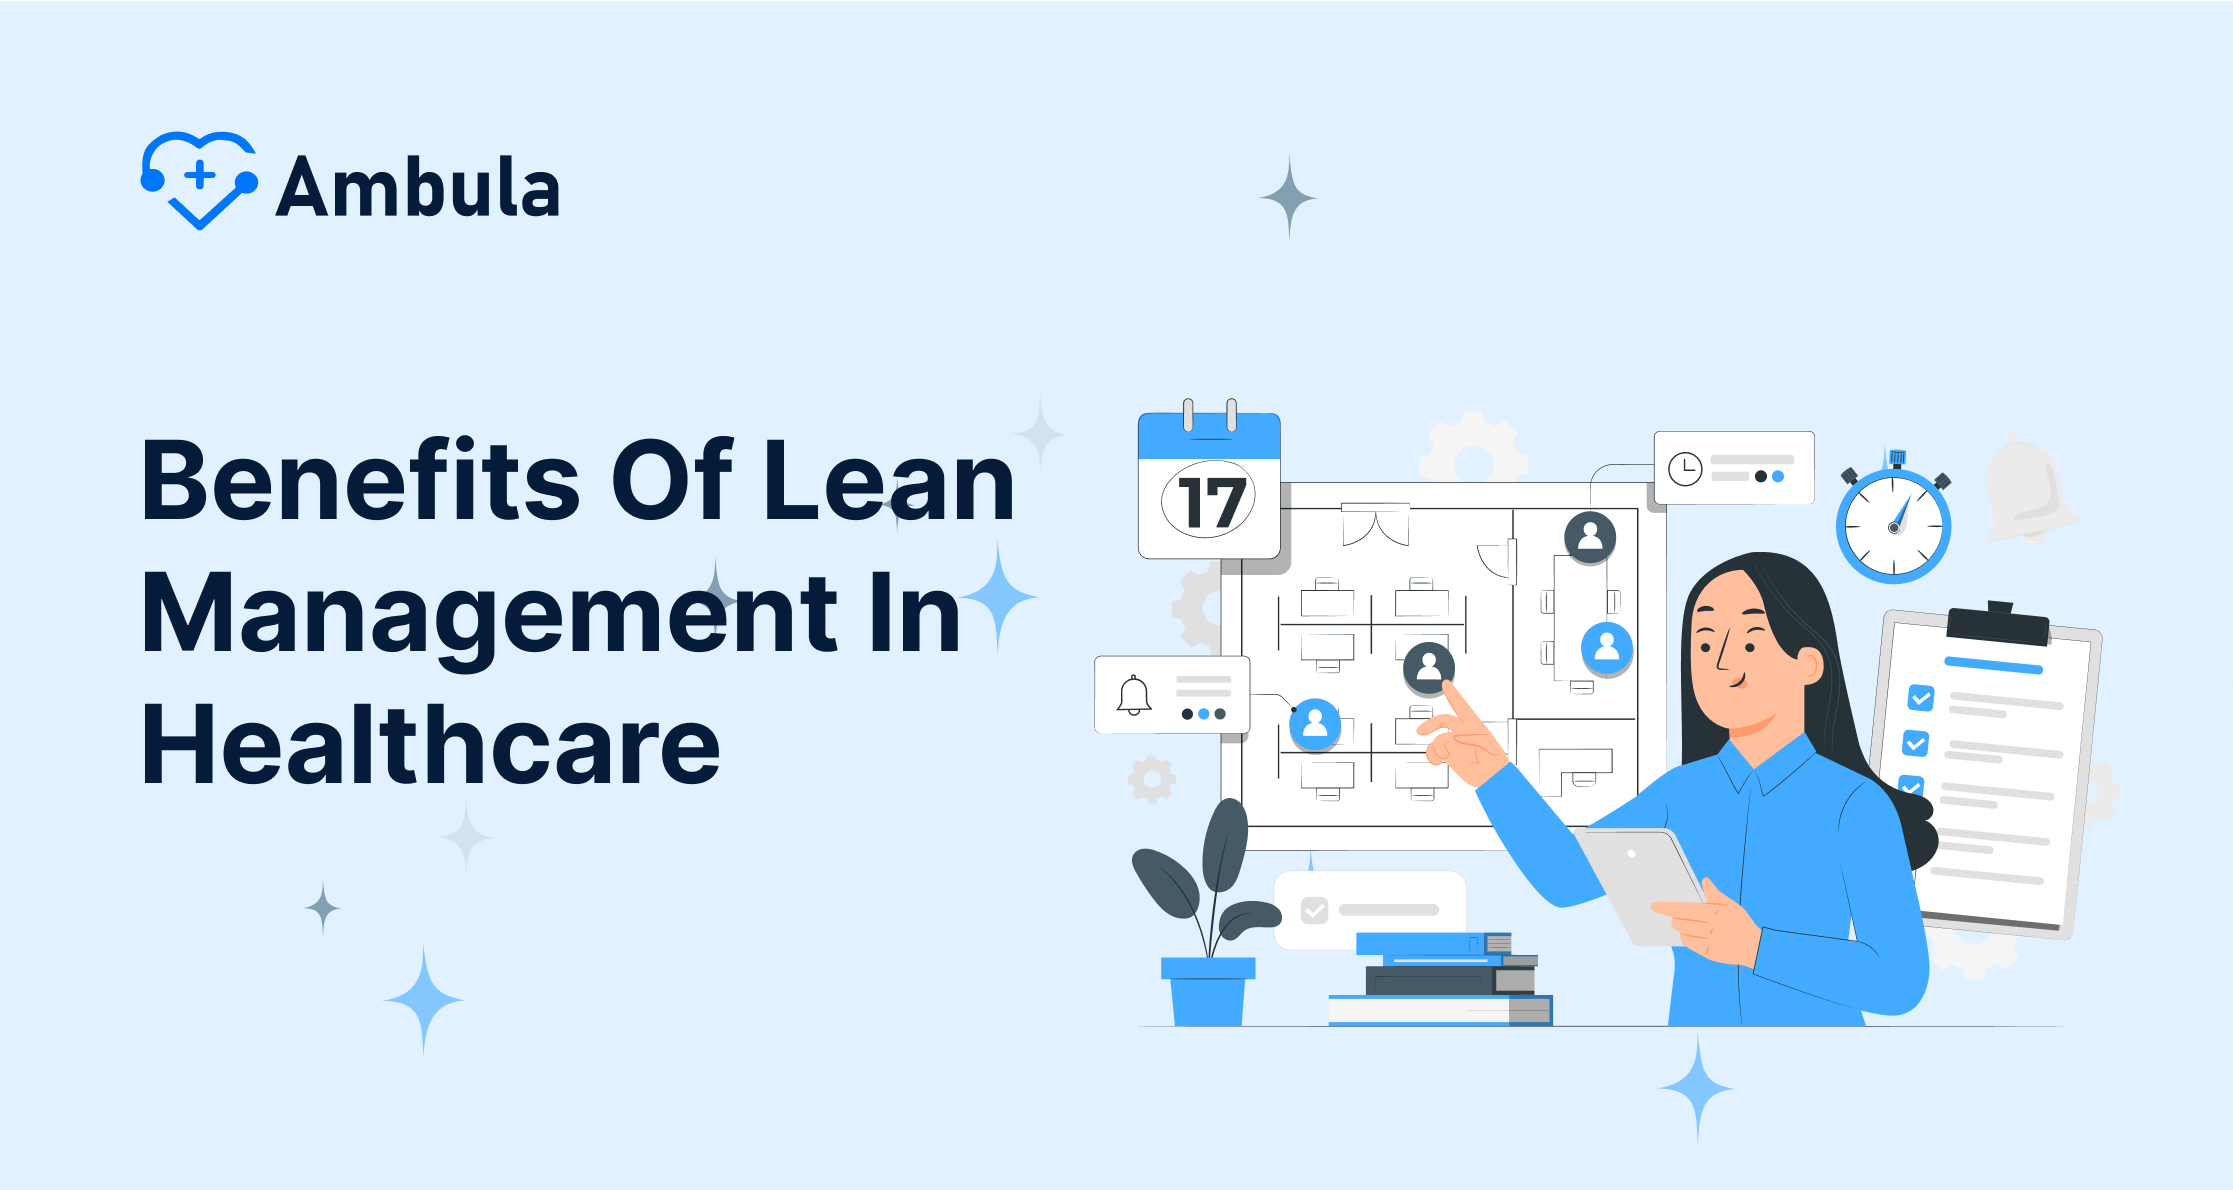 Benefits Of Lean Management In Healthcare